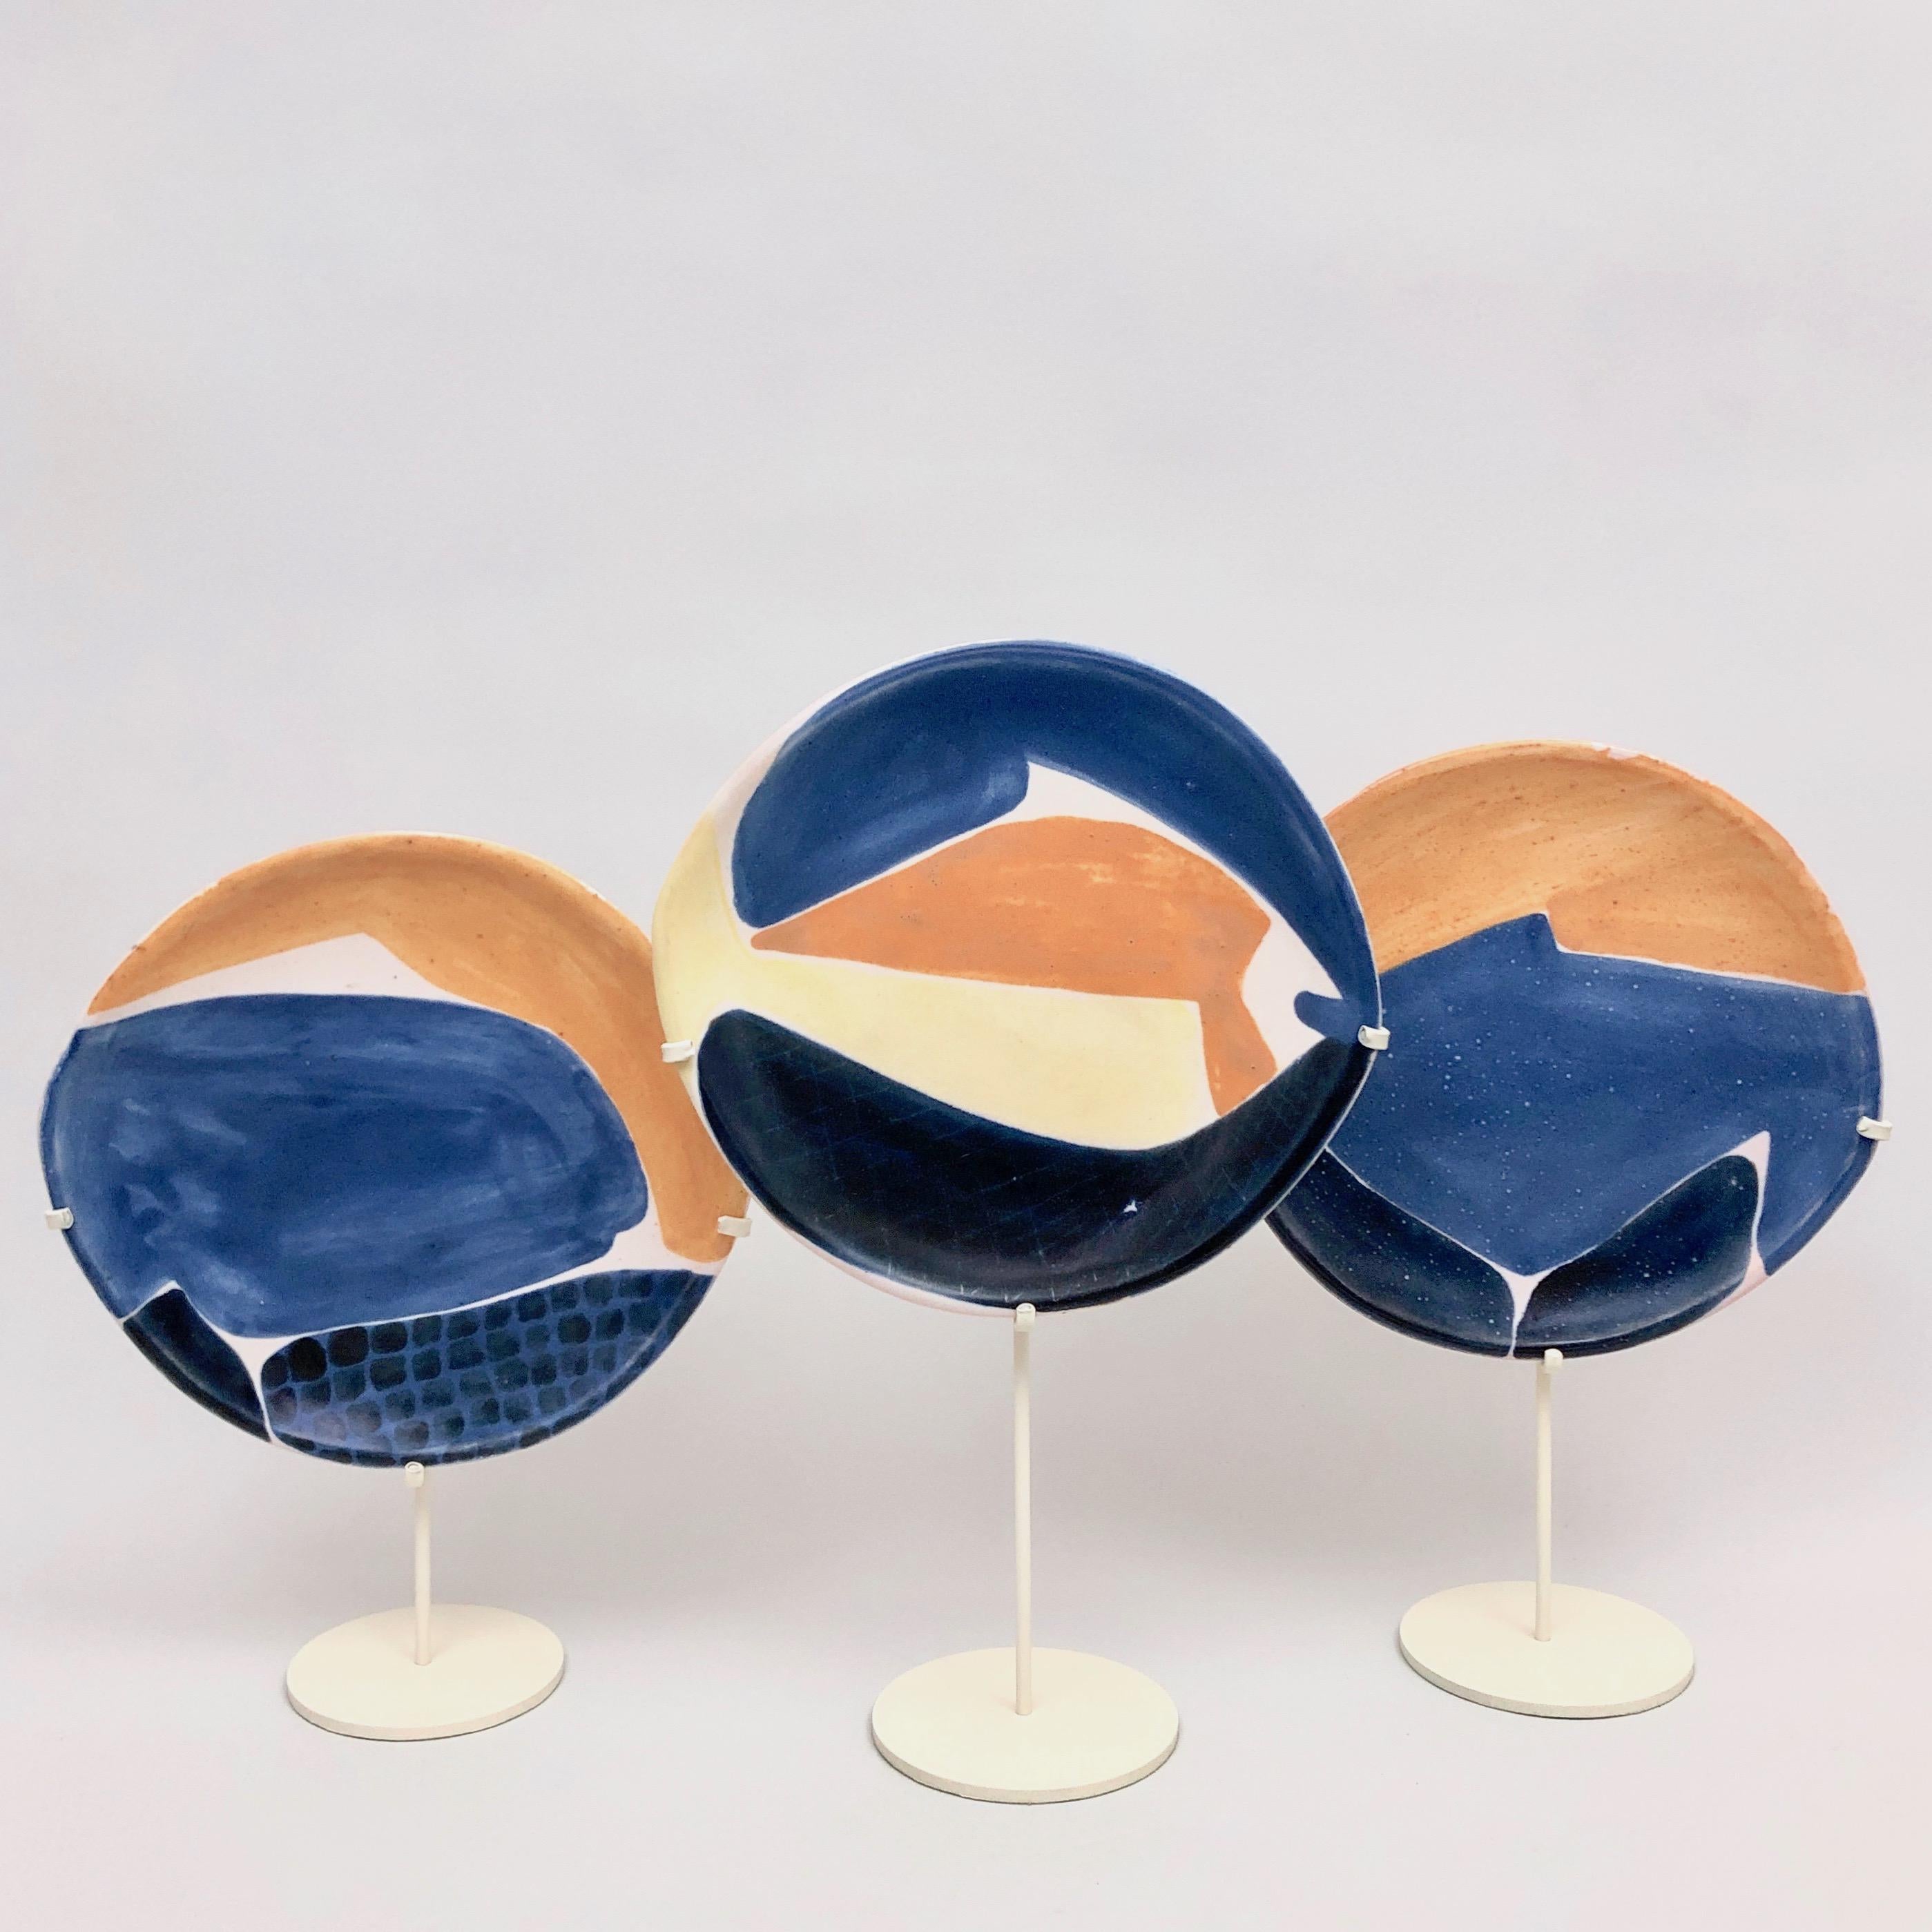 Rare set of 3 ceramic dishes, earthenware glazed in shades of blue, orange, white cream and pale yellow, decorated with designs of stylized fishes. 
The metal bases, with various height dimensions, enameled in white cream, are contemporaries (new),